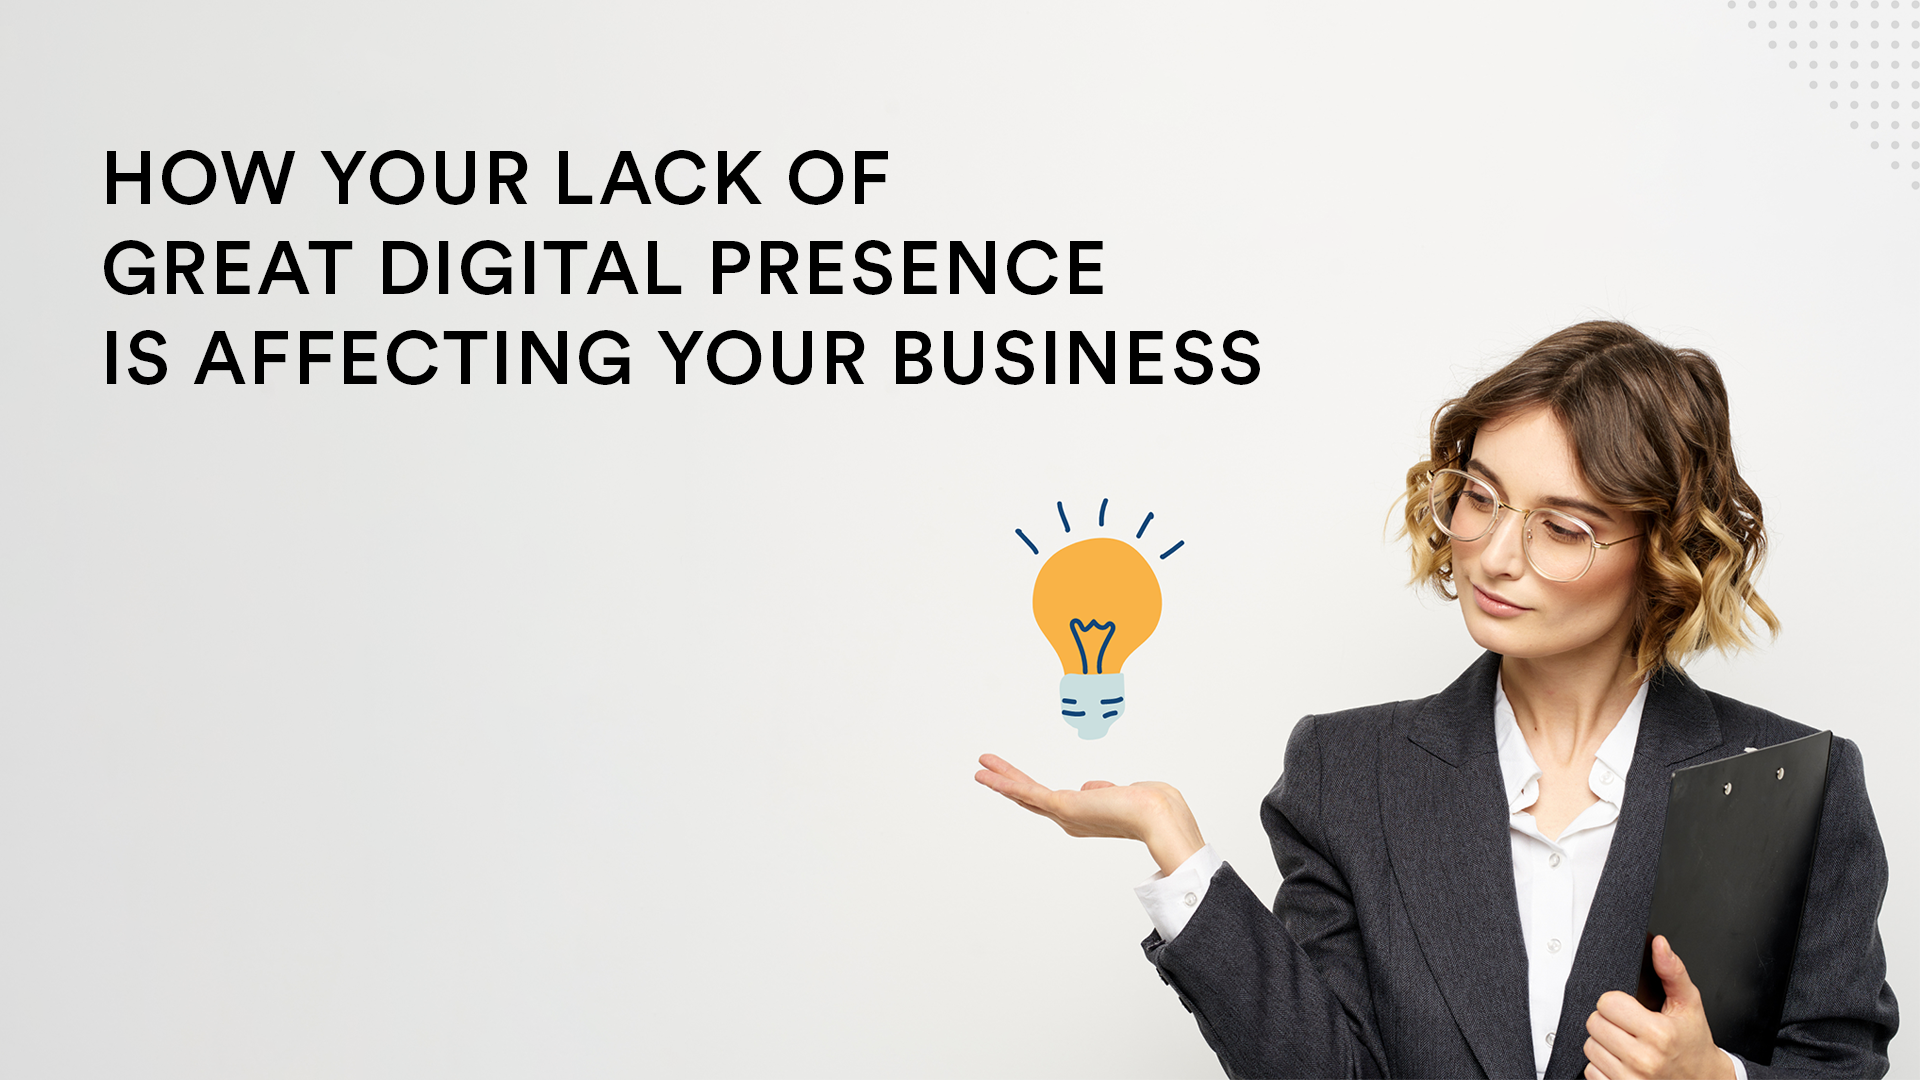 How Your Lack of Great Digital Presence is Affecting Your Business